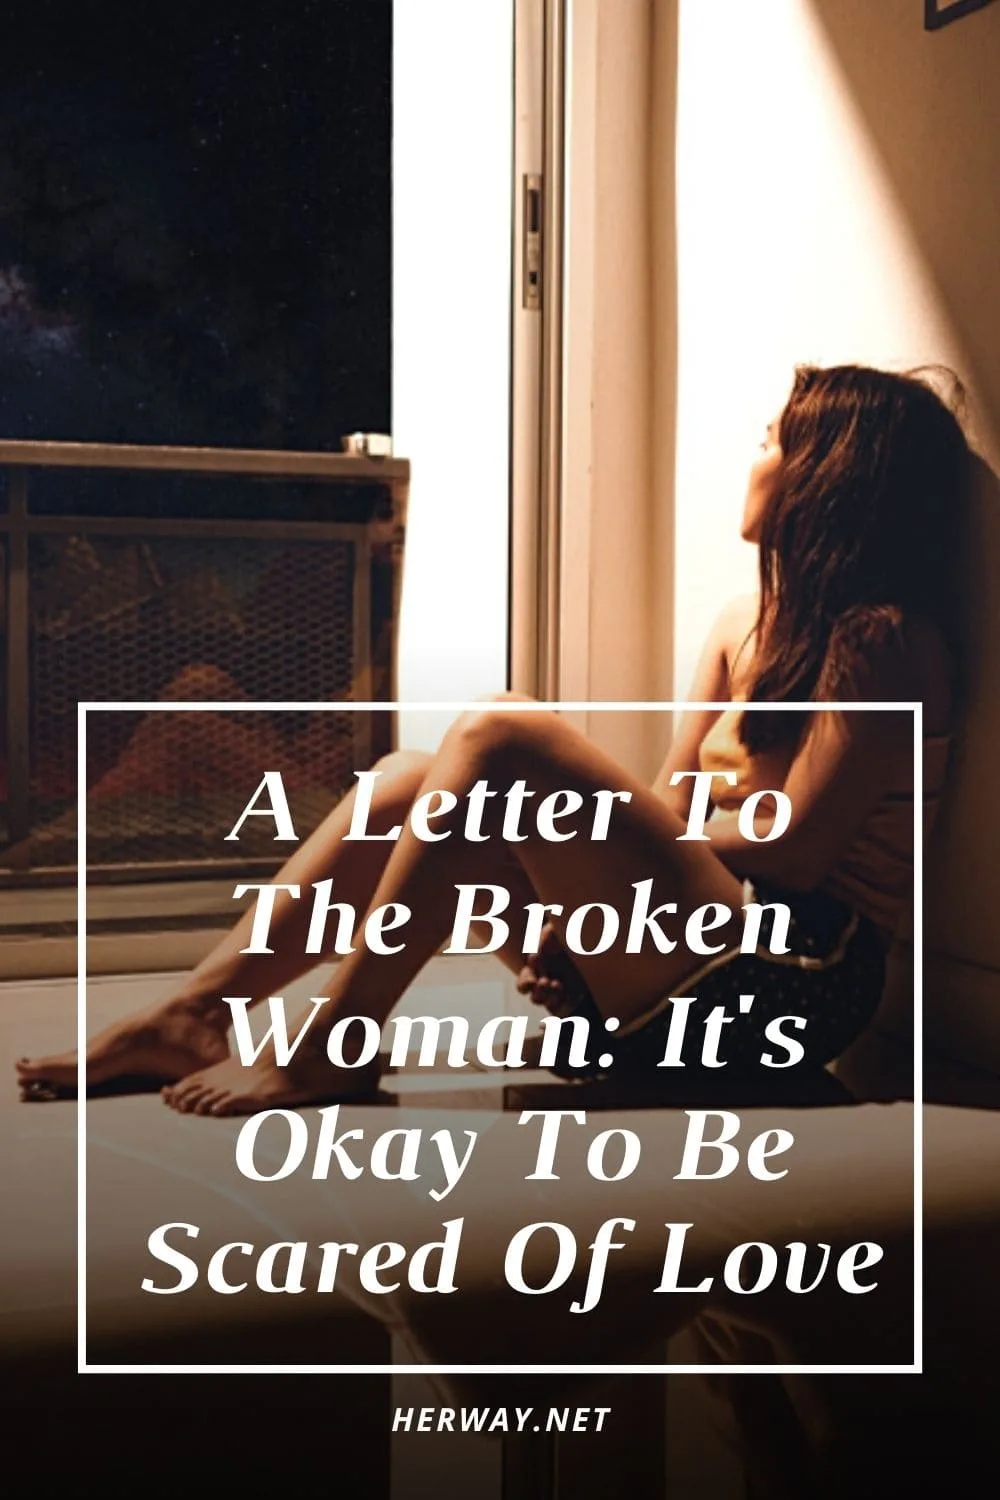 A Letter To The Broken Woman: It's Okay To Be Scared Of Love